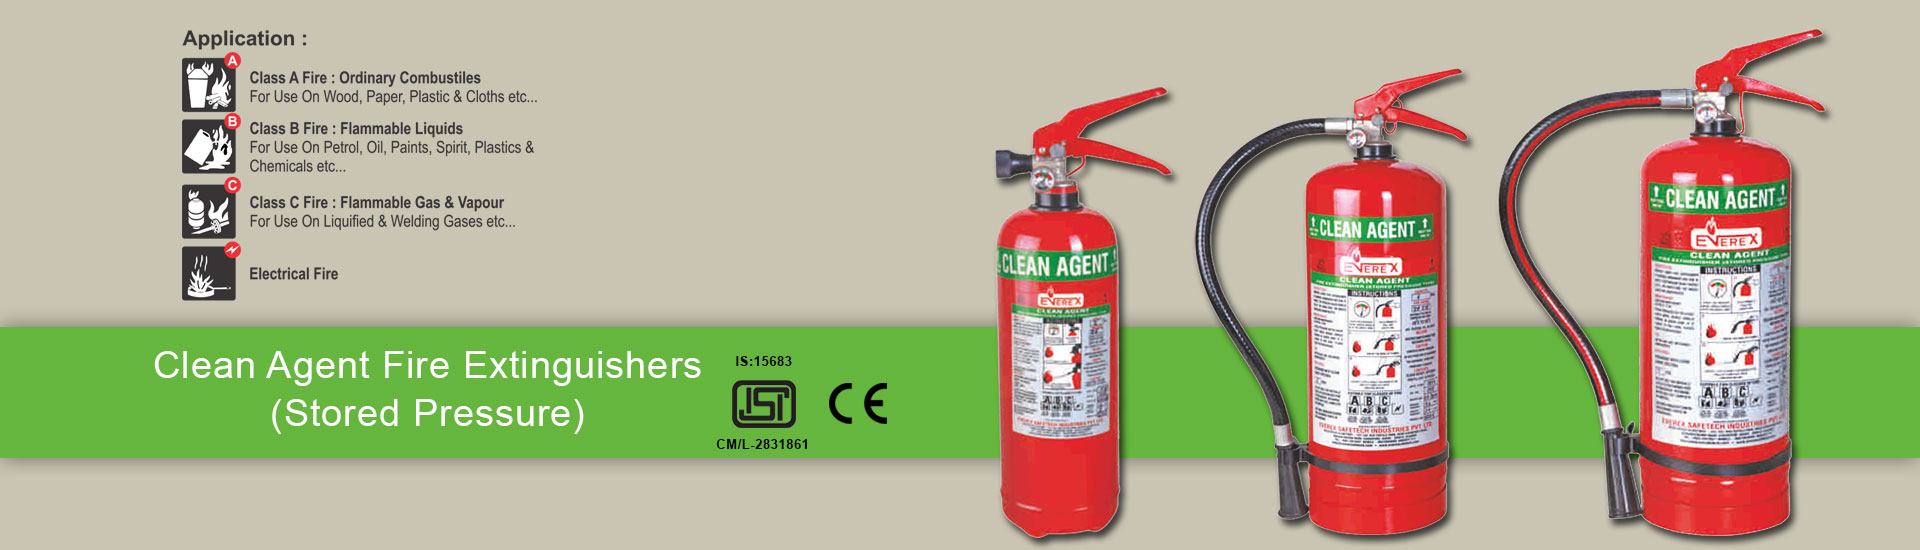 Clean agent fire extinguishers